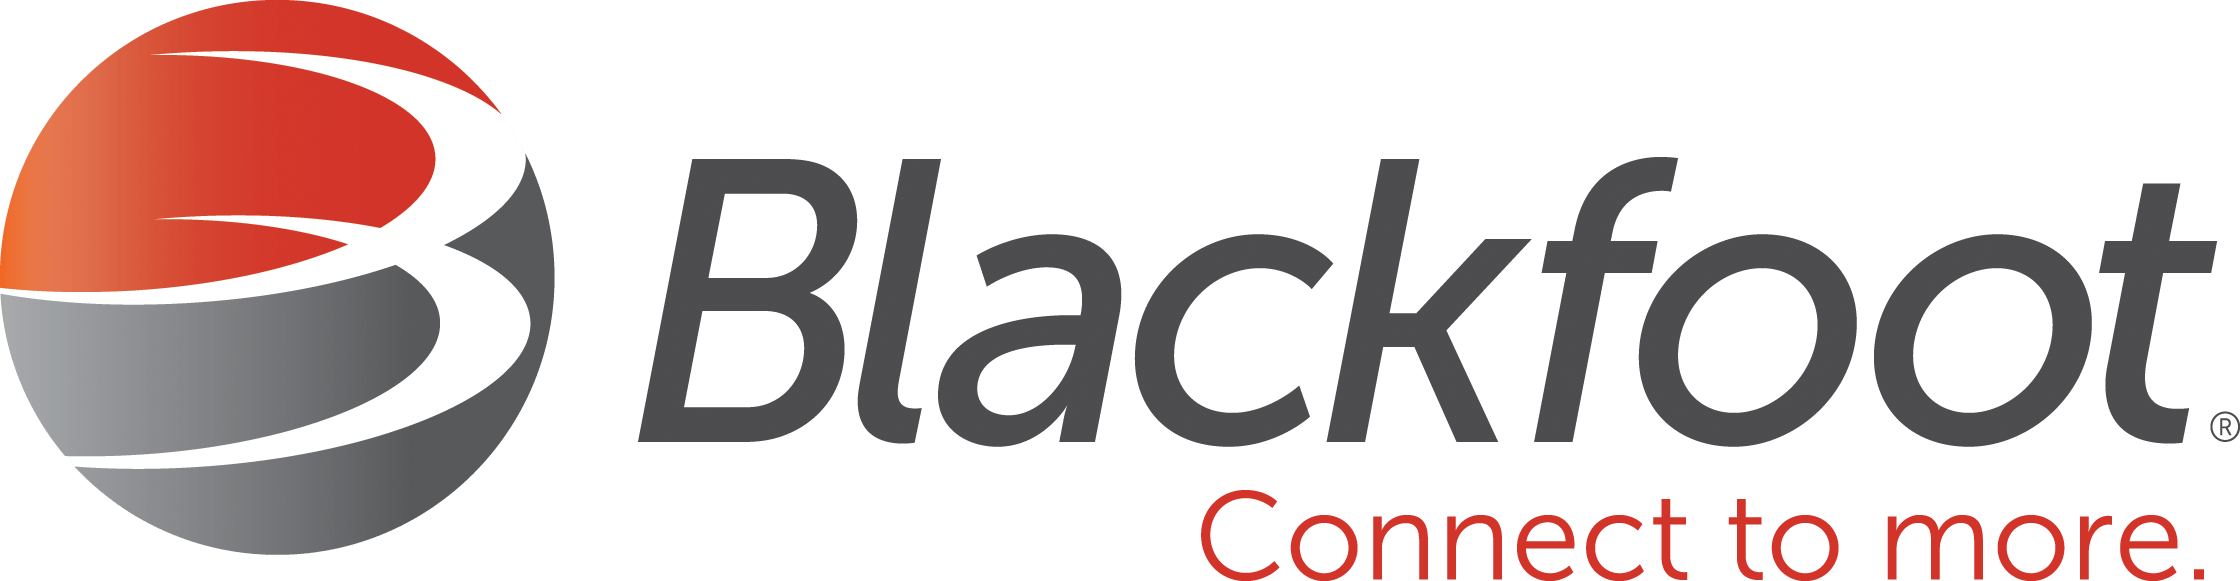 Blackfeet Logo - Local Internet Provider + Phone Service for Home and Business ...